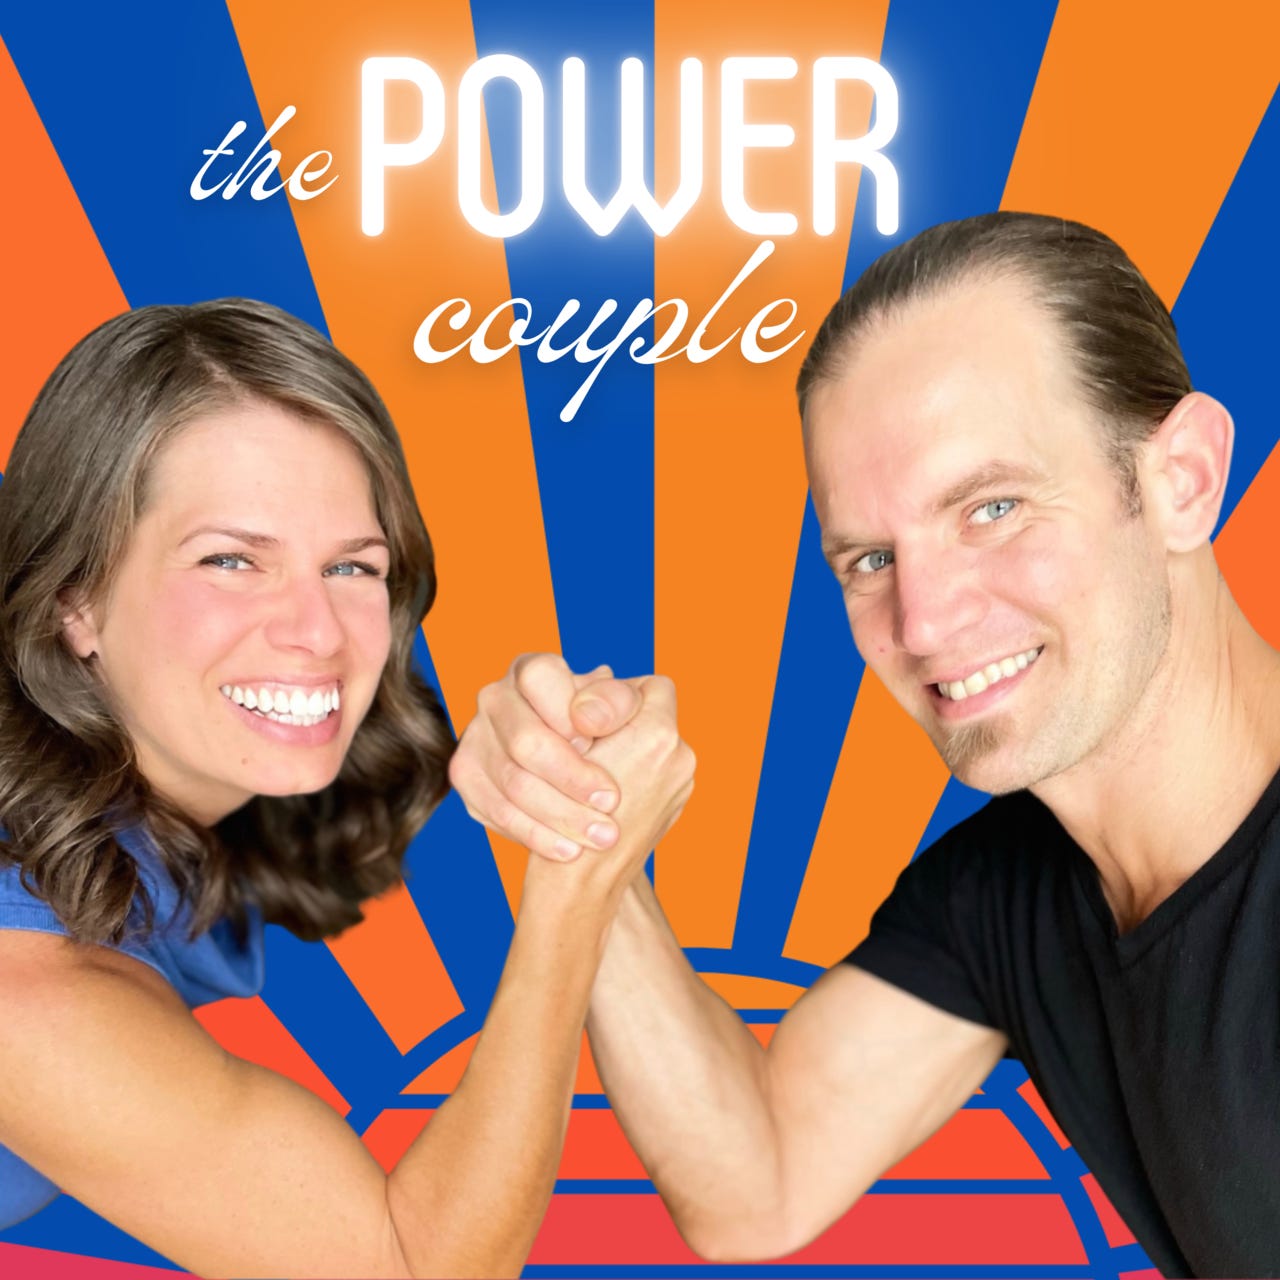 Artwork for The Power Couple by Roman Shapoval